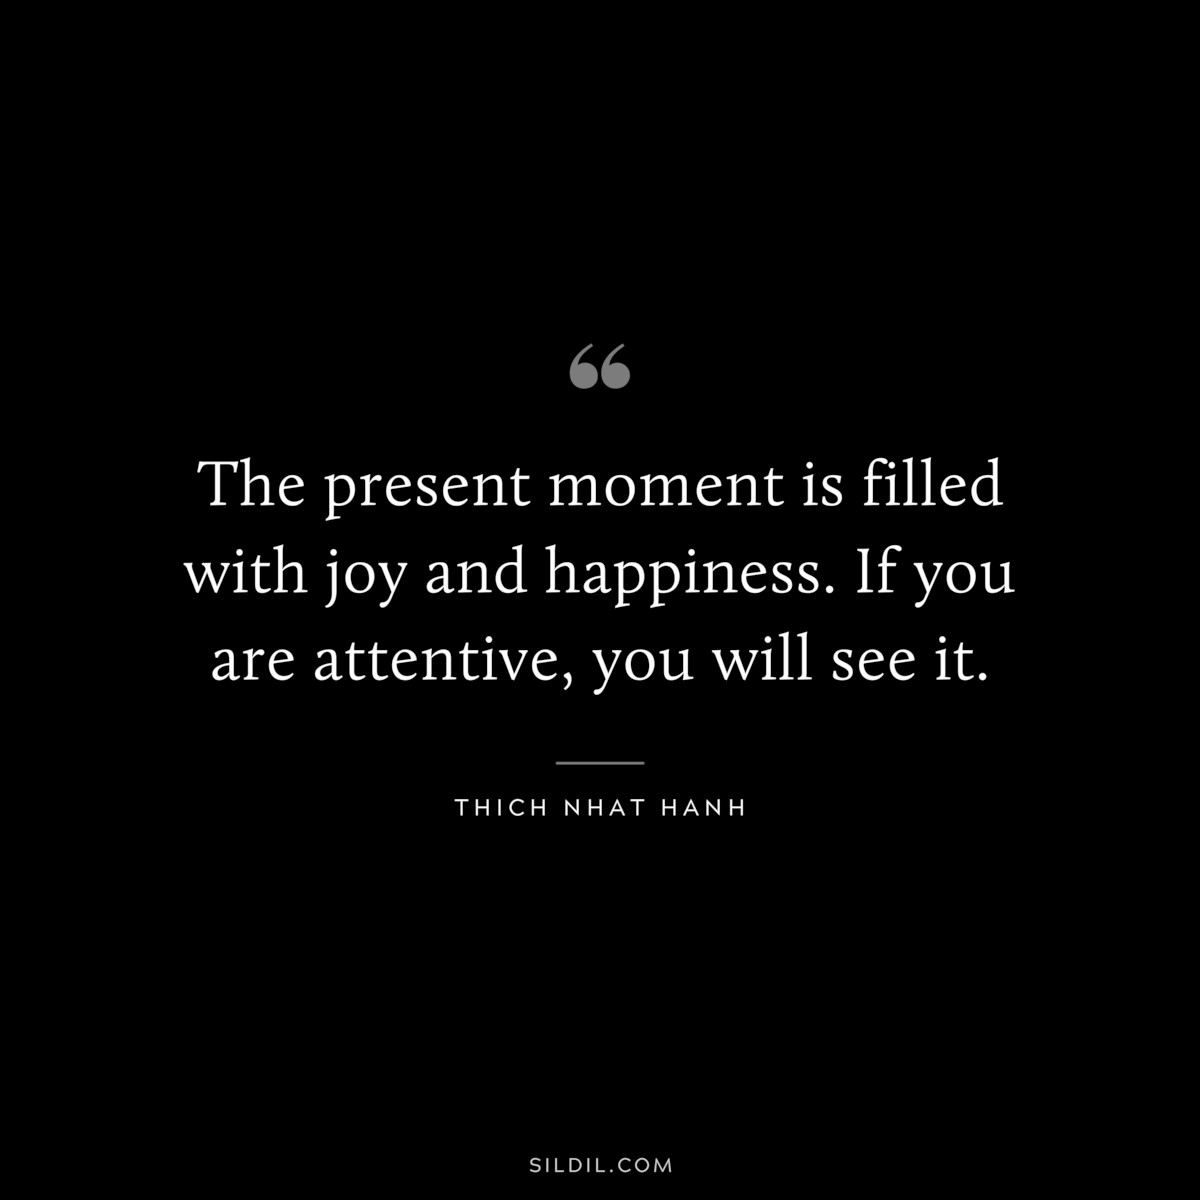 The present moment is filled with joy and happiness. If you are attentive, you will see it. ― Thich Nhat Hanh